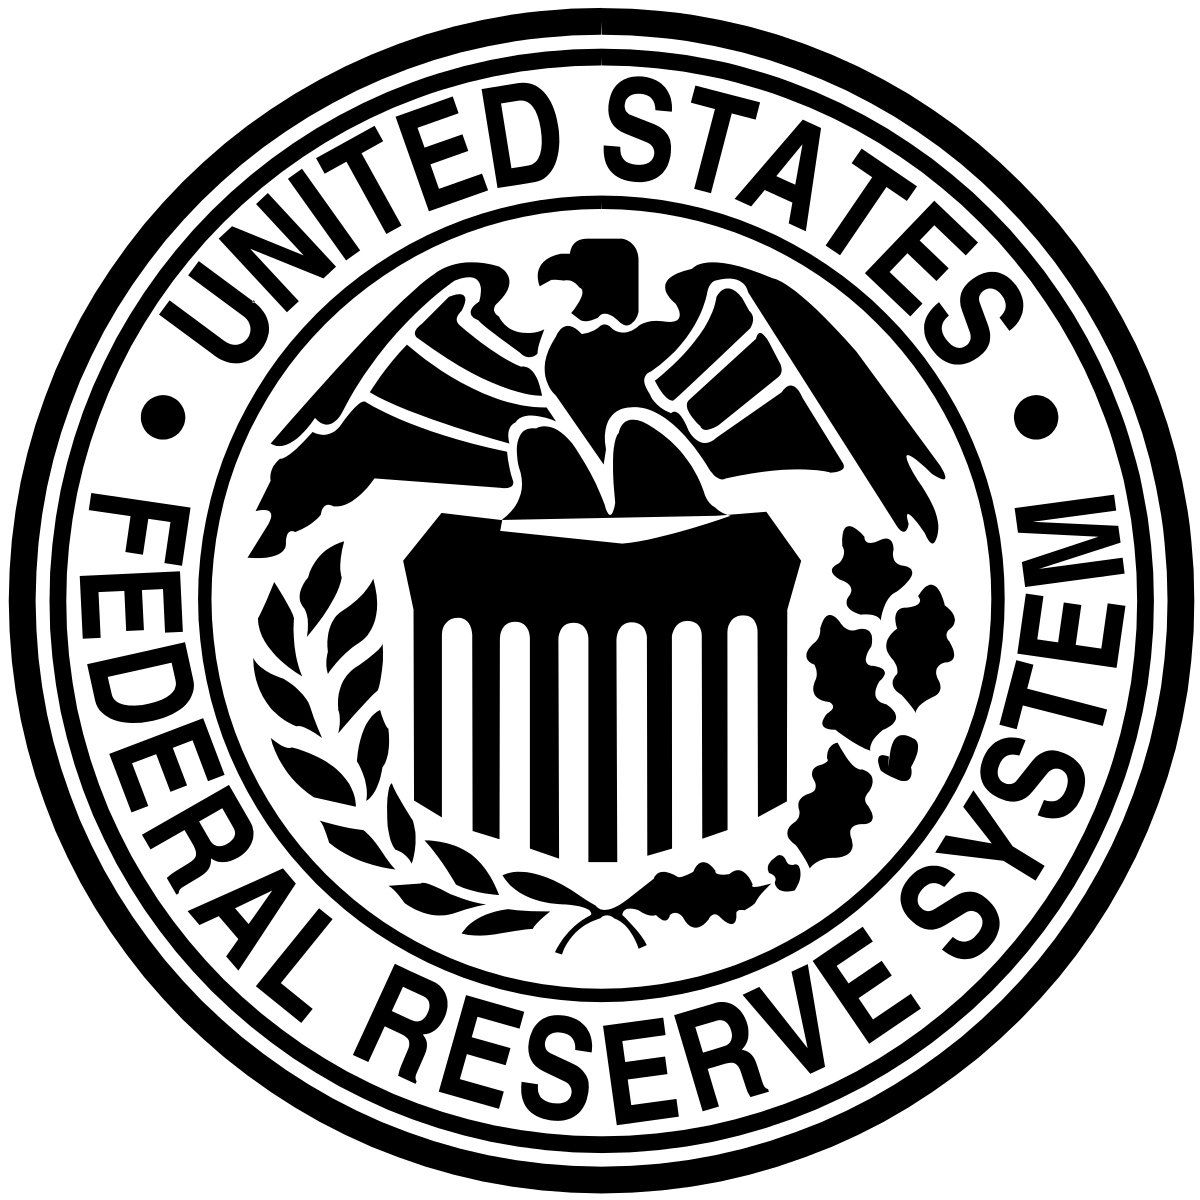 US Federal Reserve Might Raise Interest Rates By This Much, Here Are The Major Macro Issues For Wednesday